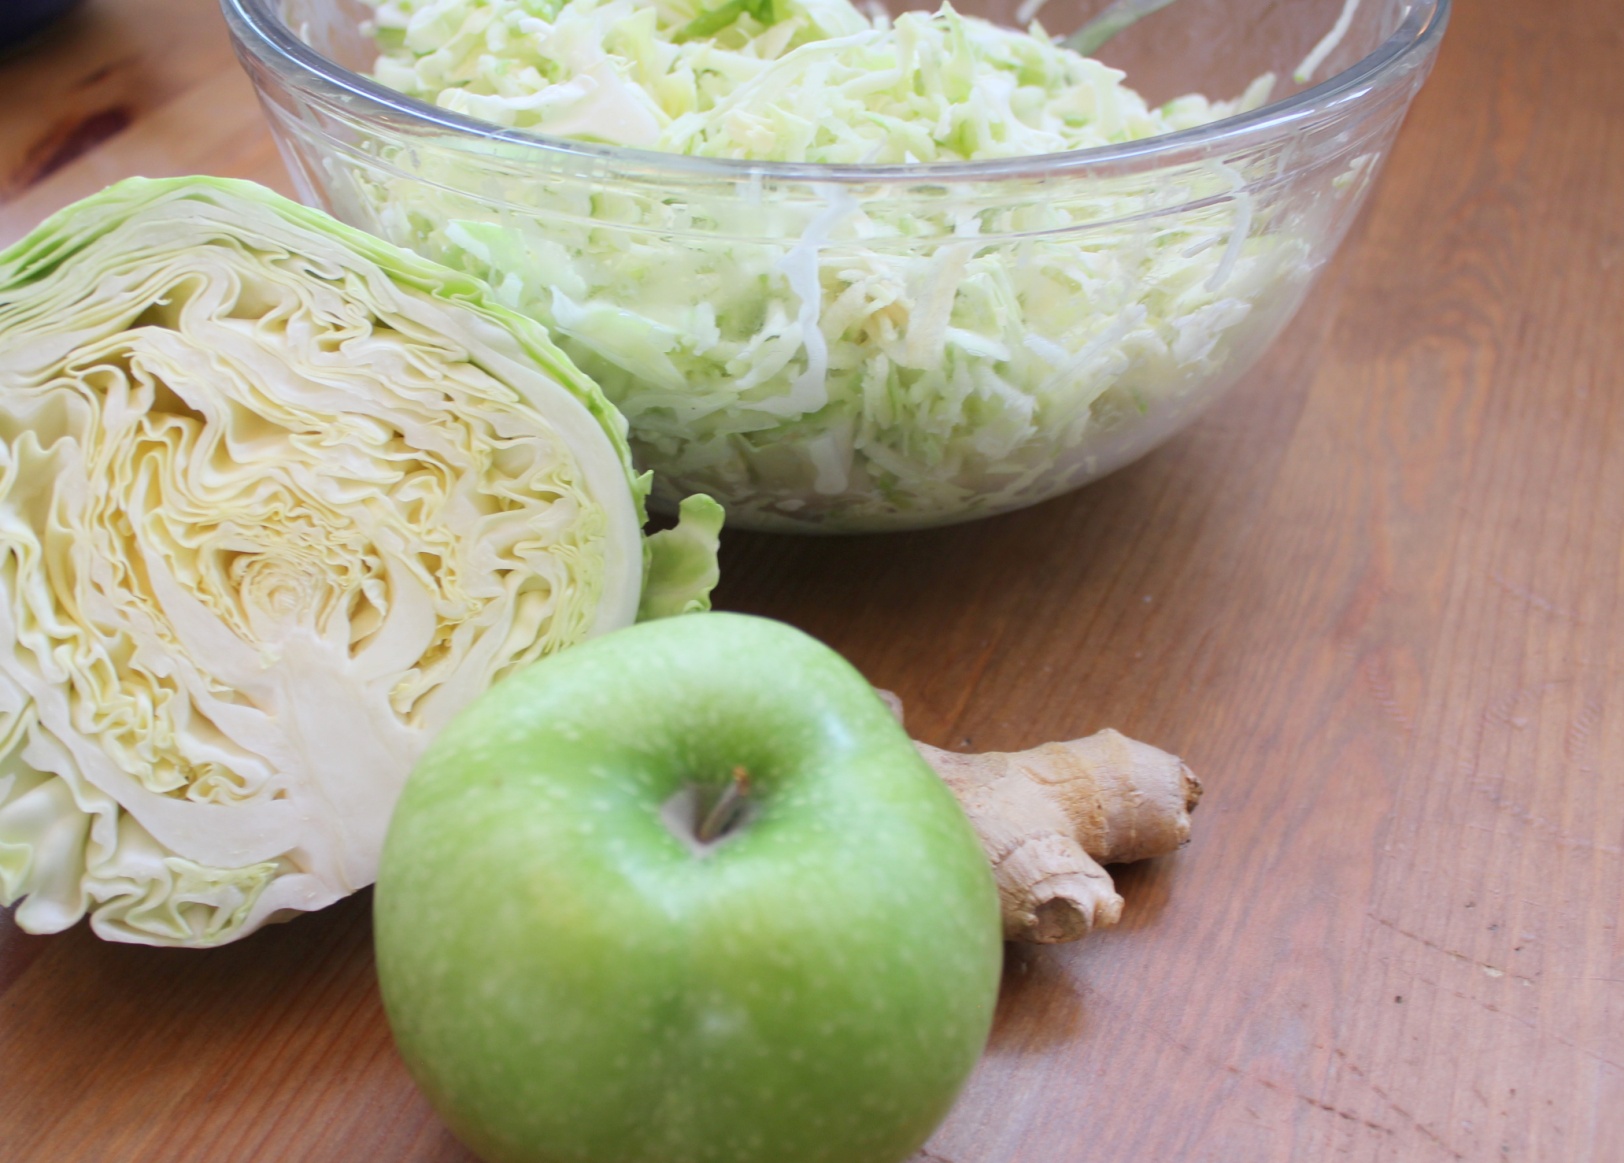 https://healthhomeandhappiness.com/wp-content/uploads/2016/01/Green-apple-and-cabbage-slaw-with-ginger-dressing.jpg